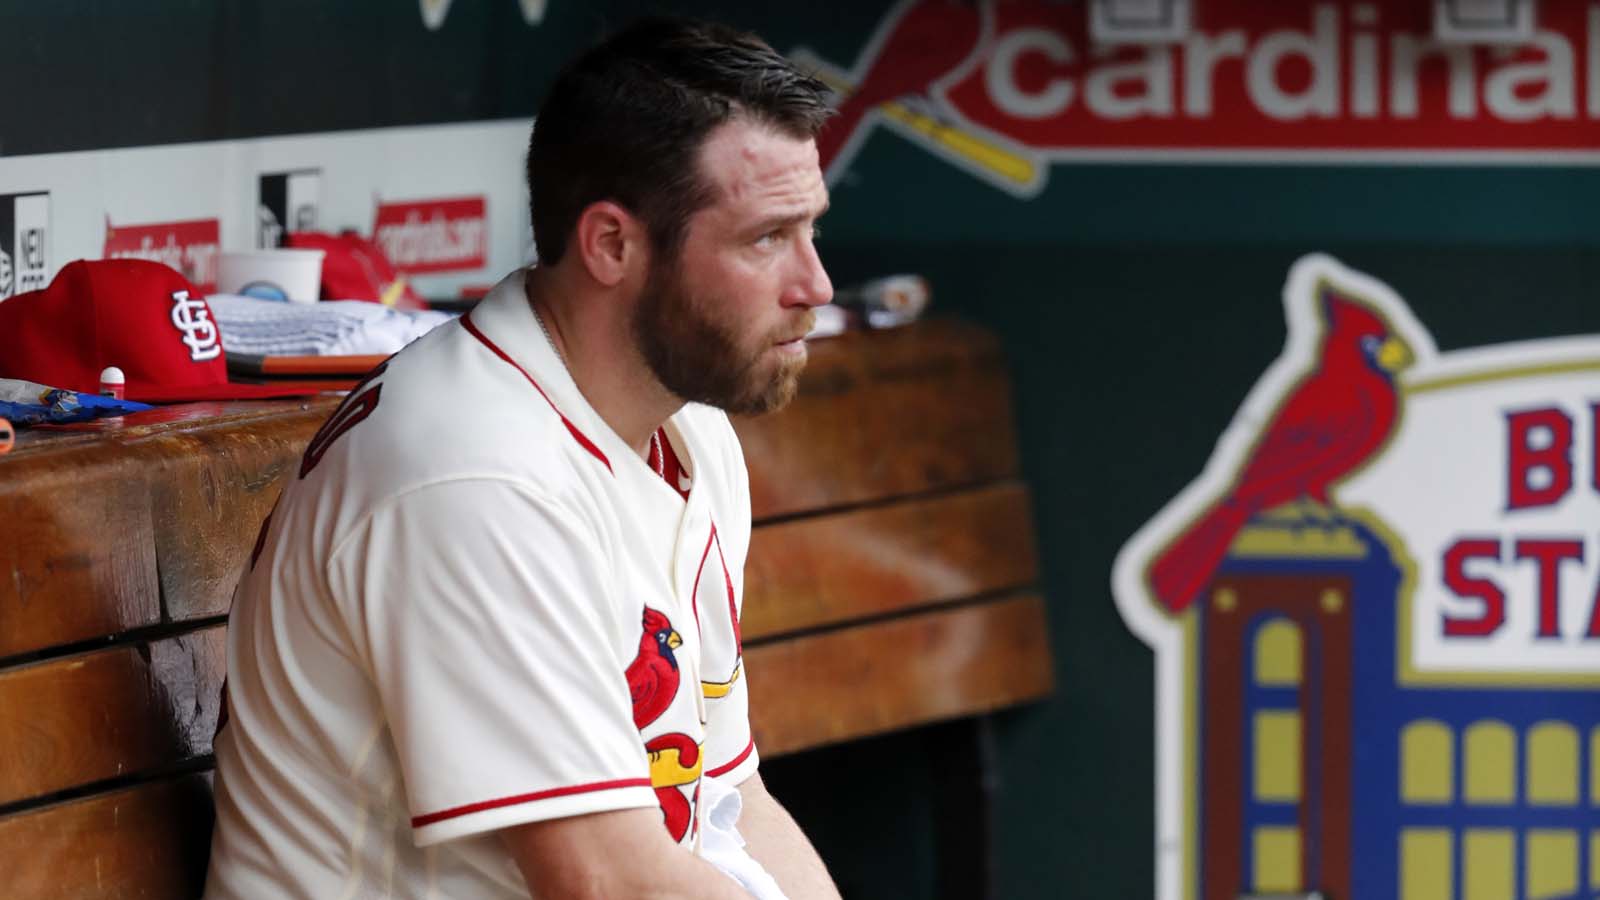 Cardinals can't hold late lead, fall 7-6 to Phillies